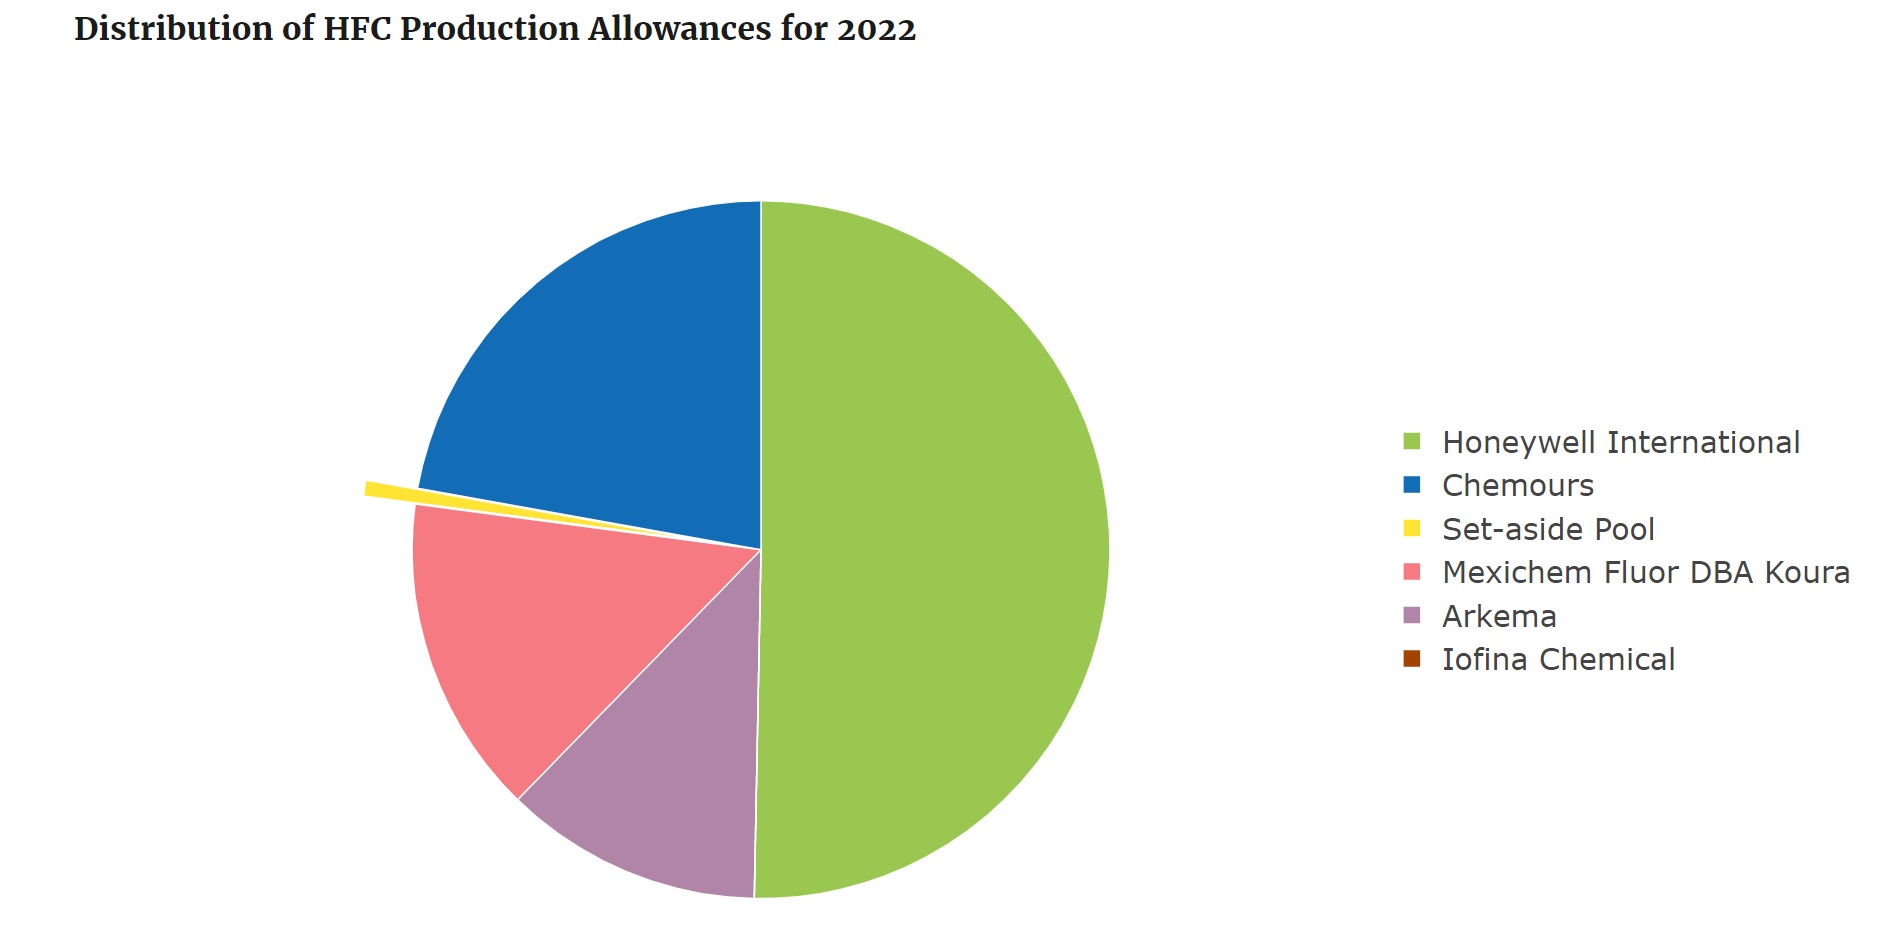 Production allowances allocated to each company for 2022.